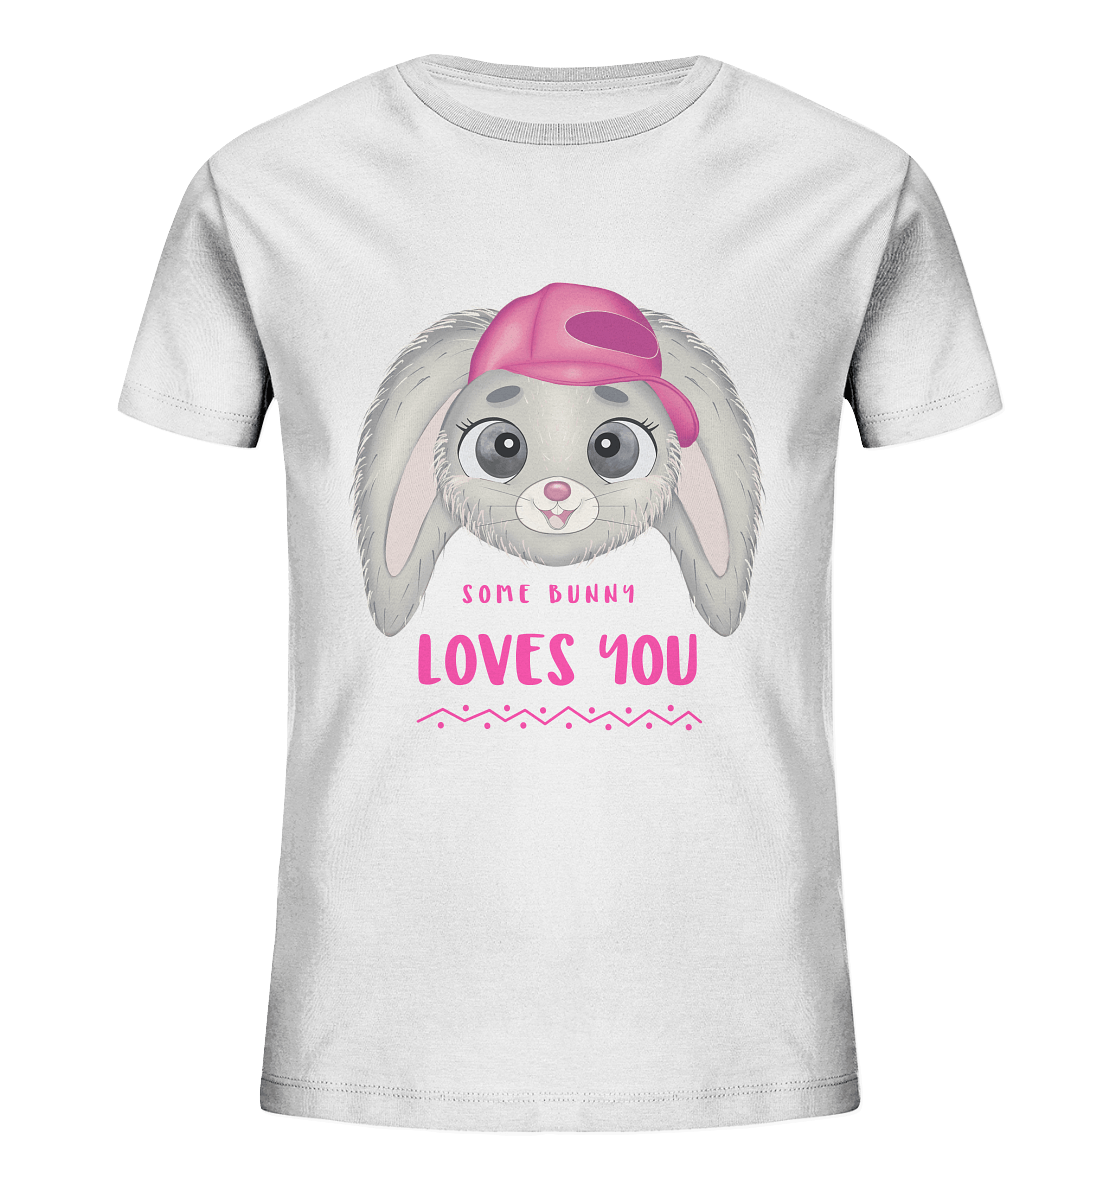 Süßes Cartoon Hase T-Shirt Some Bunny loves you Kinder T-Shirt in weiß von bloominic